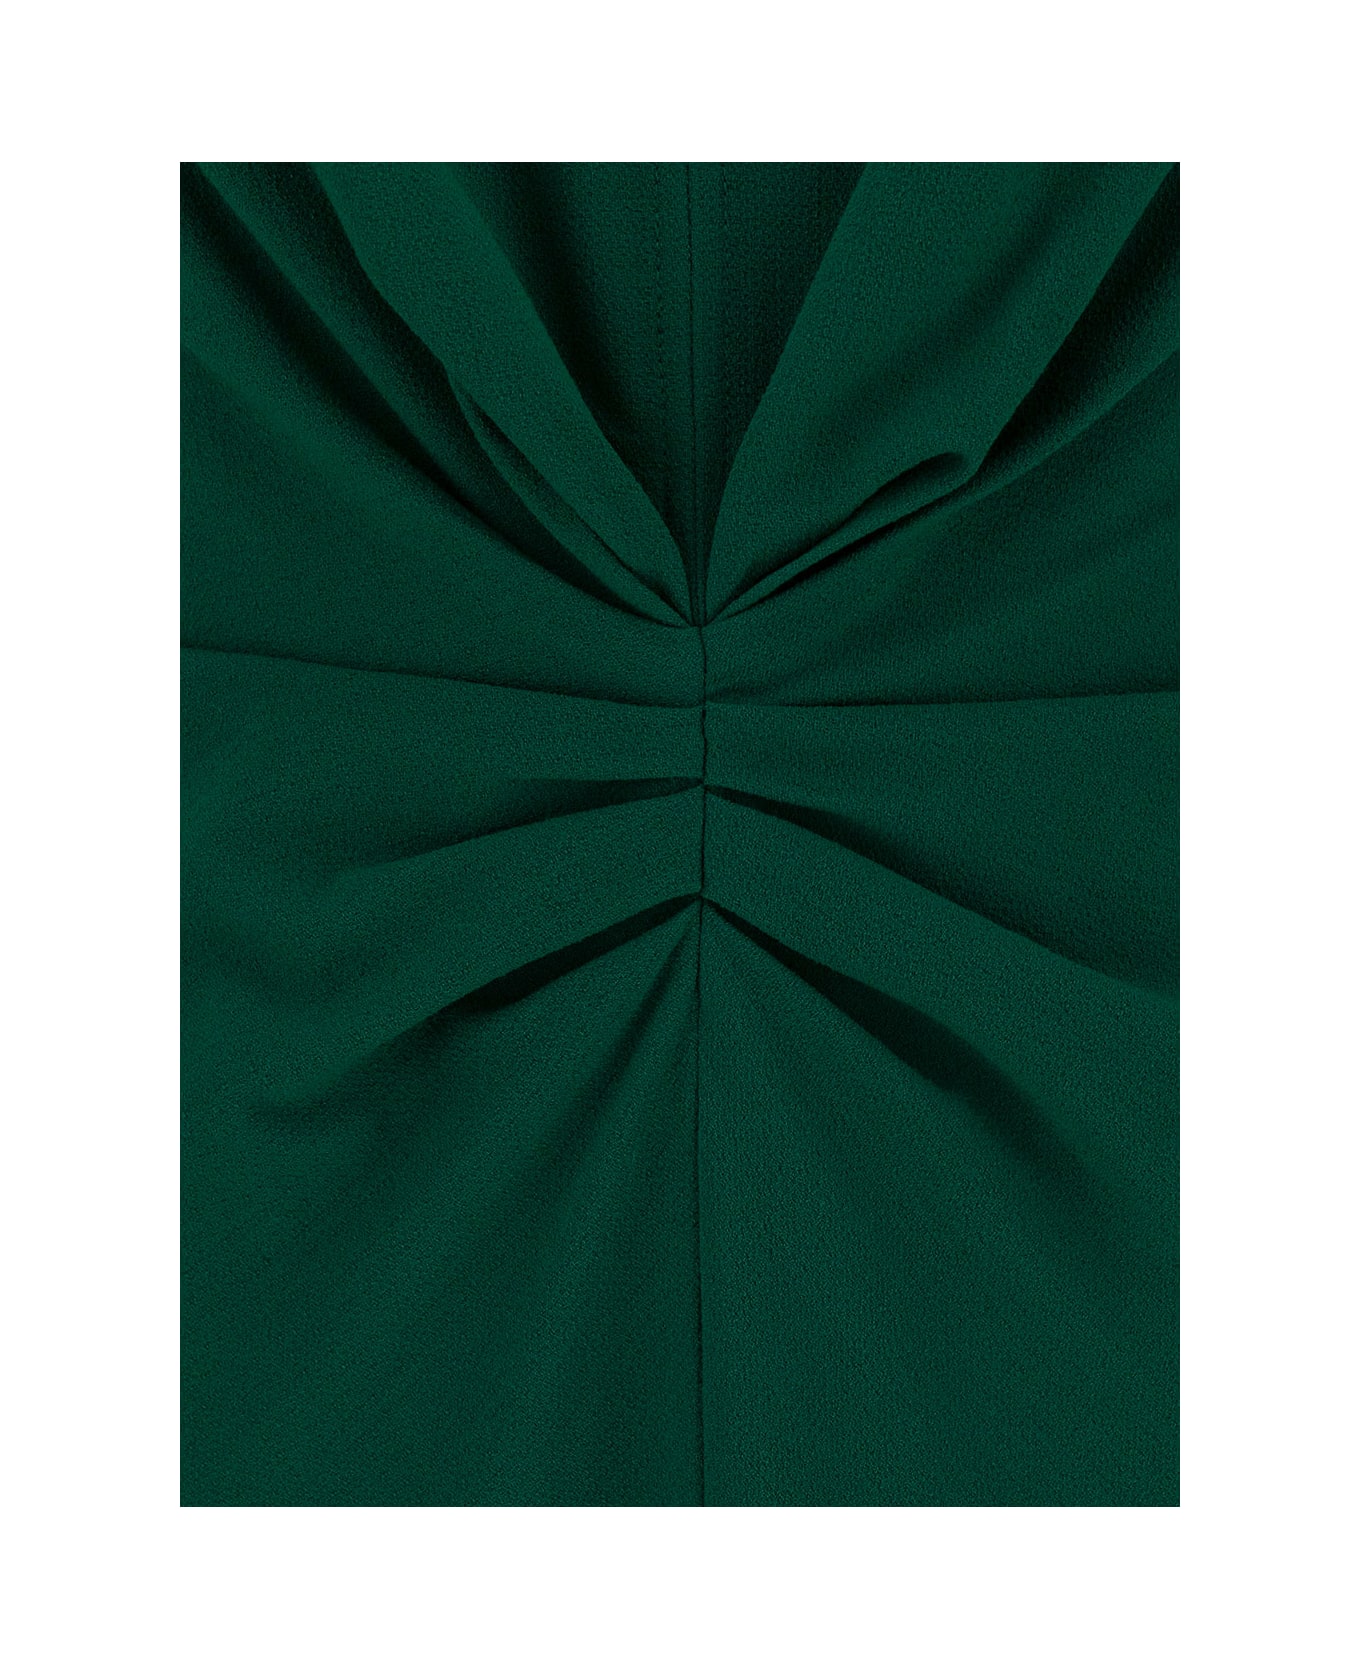 Victoria Beckham Midi Green Dress With Gatherings In Wool Blend Woman - Green ワンピース＆ドレス